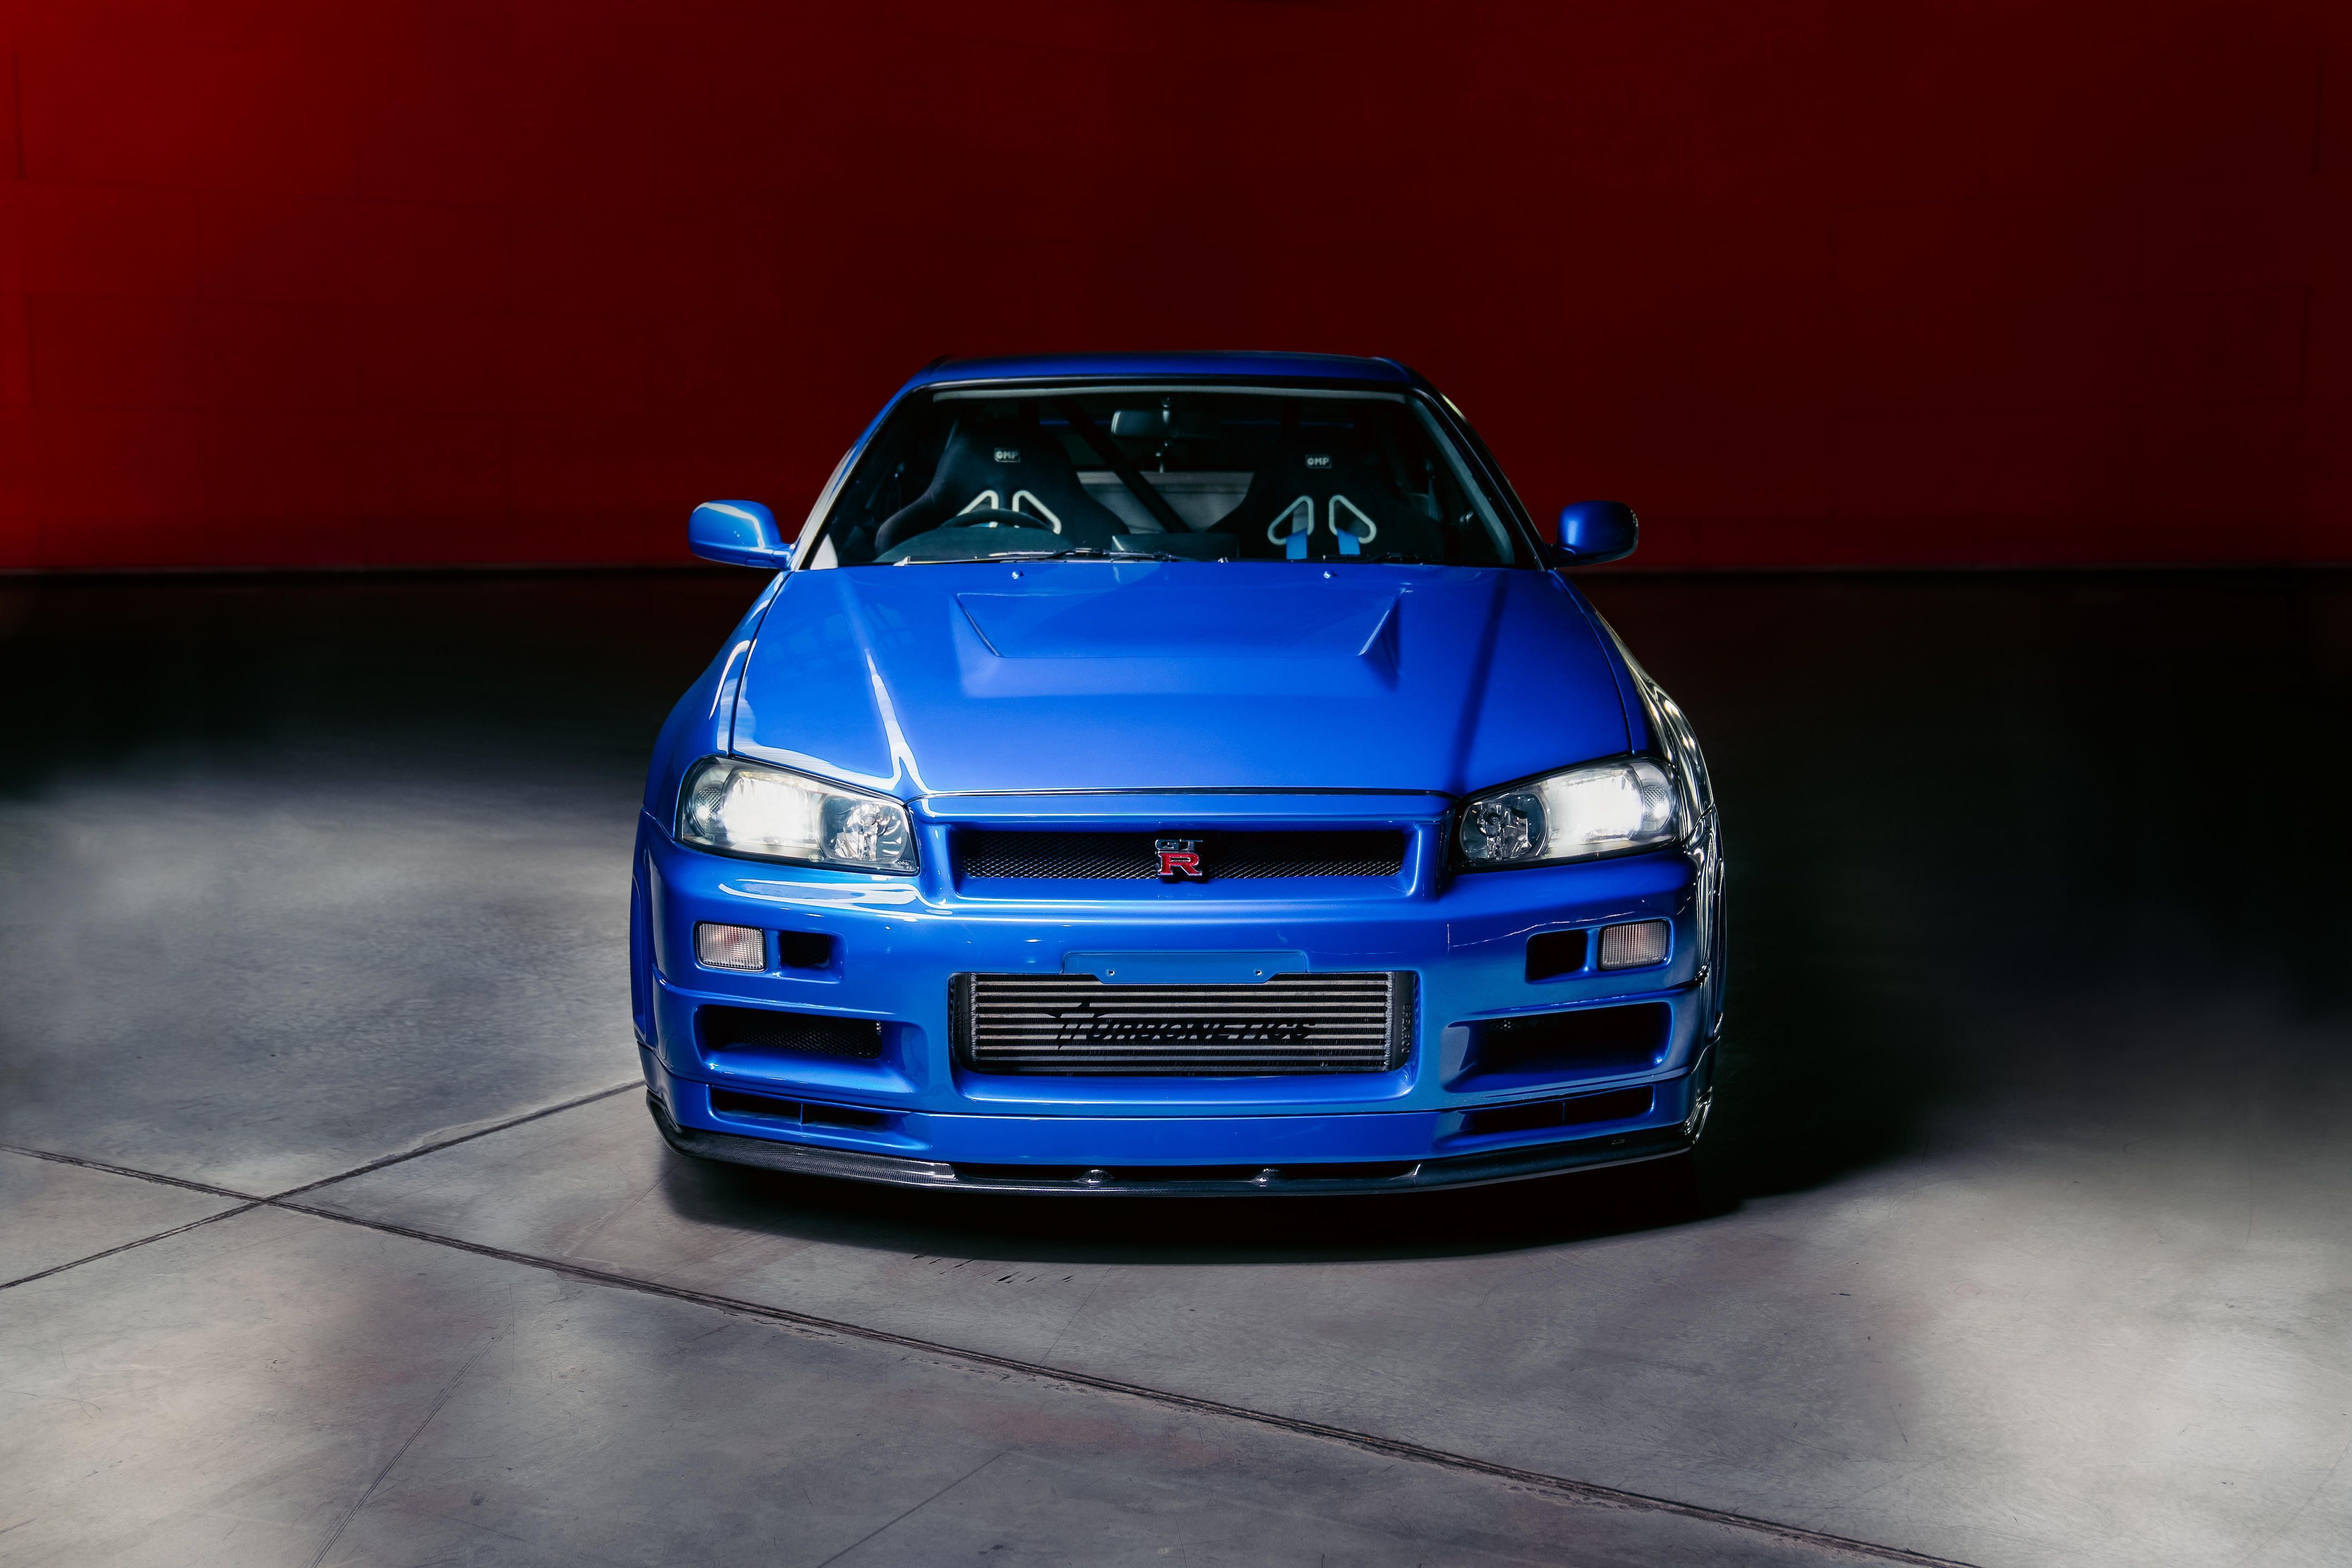 Paul Walker's Fast and Furious R34 Skyline GT-R Just Sold for $1.357 Million